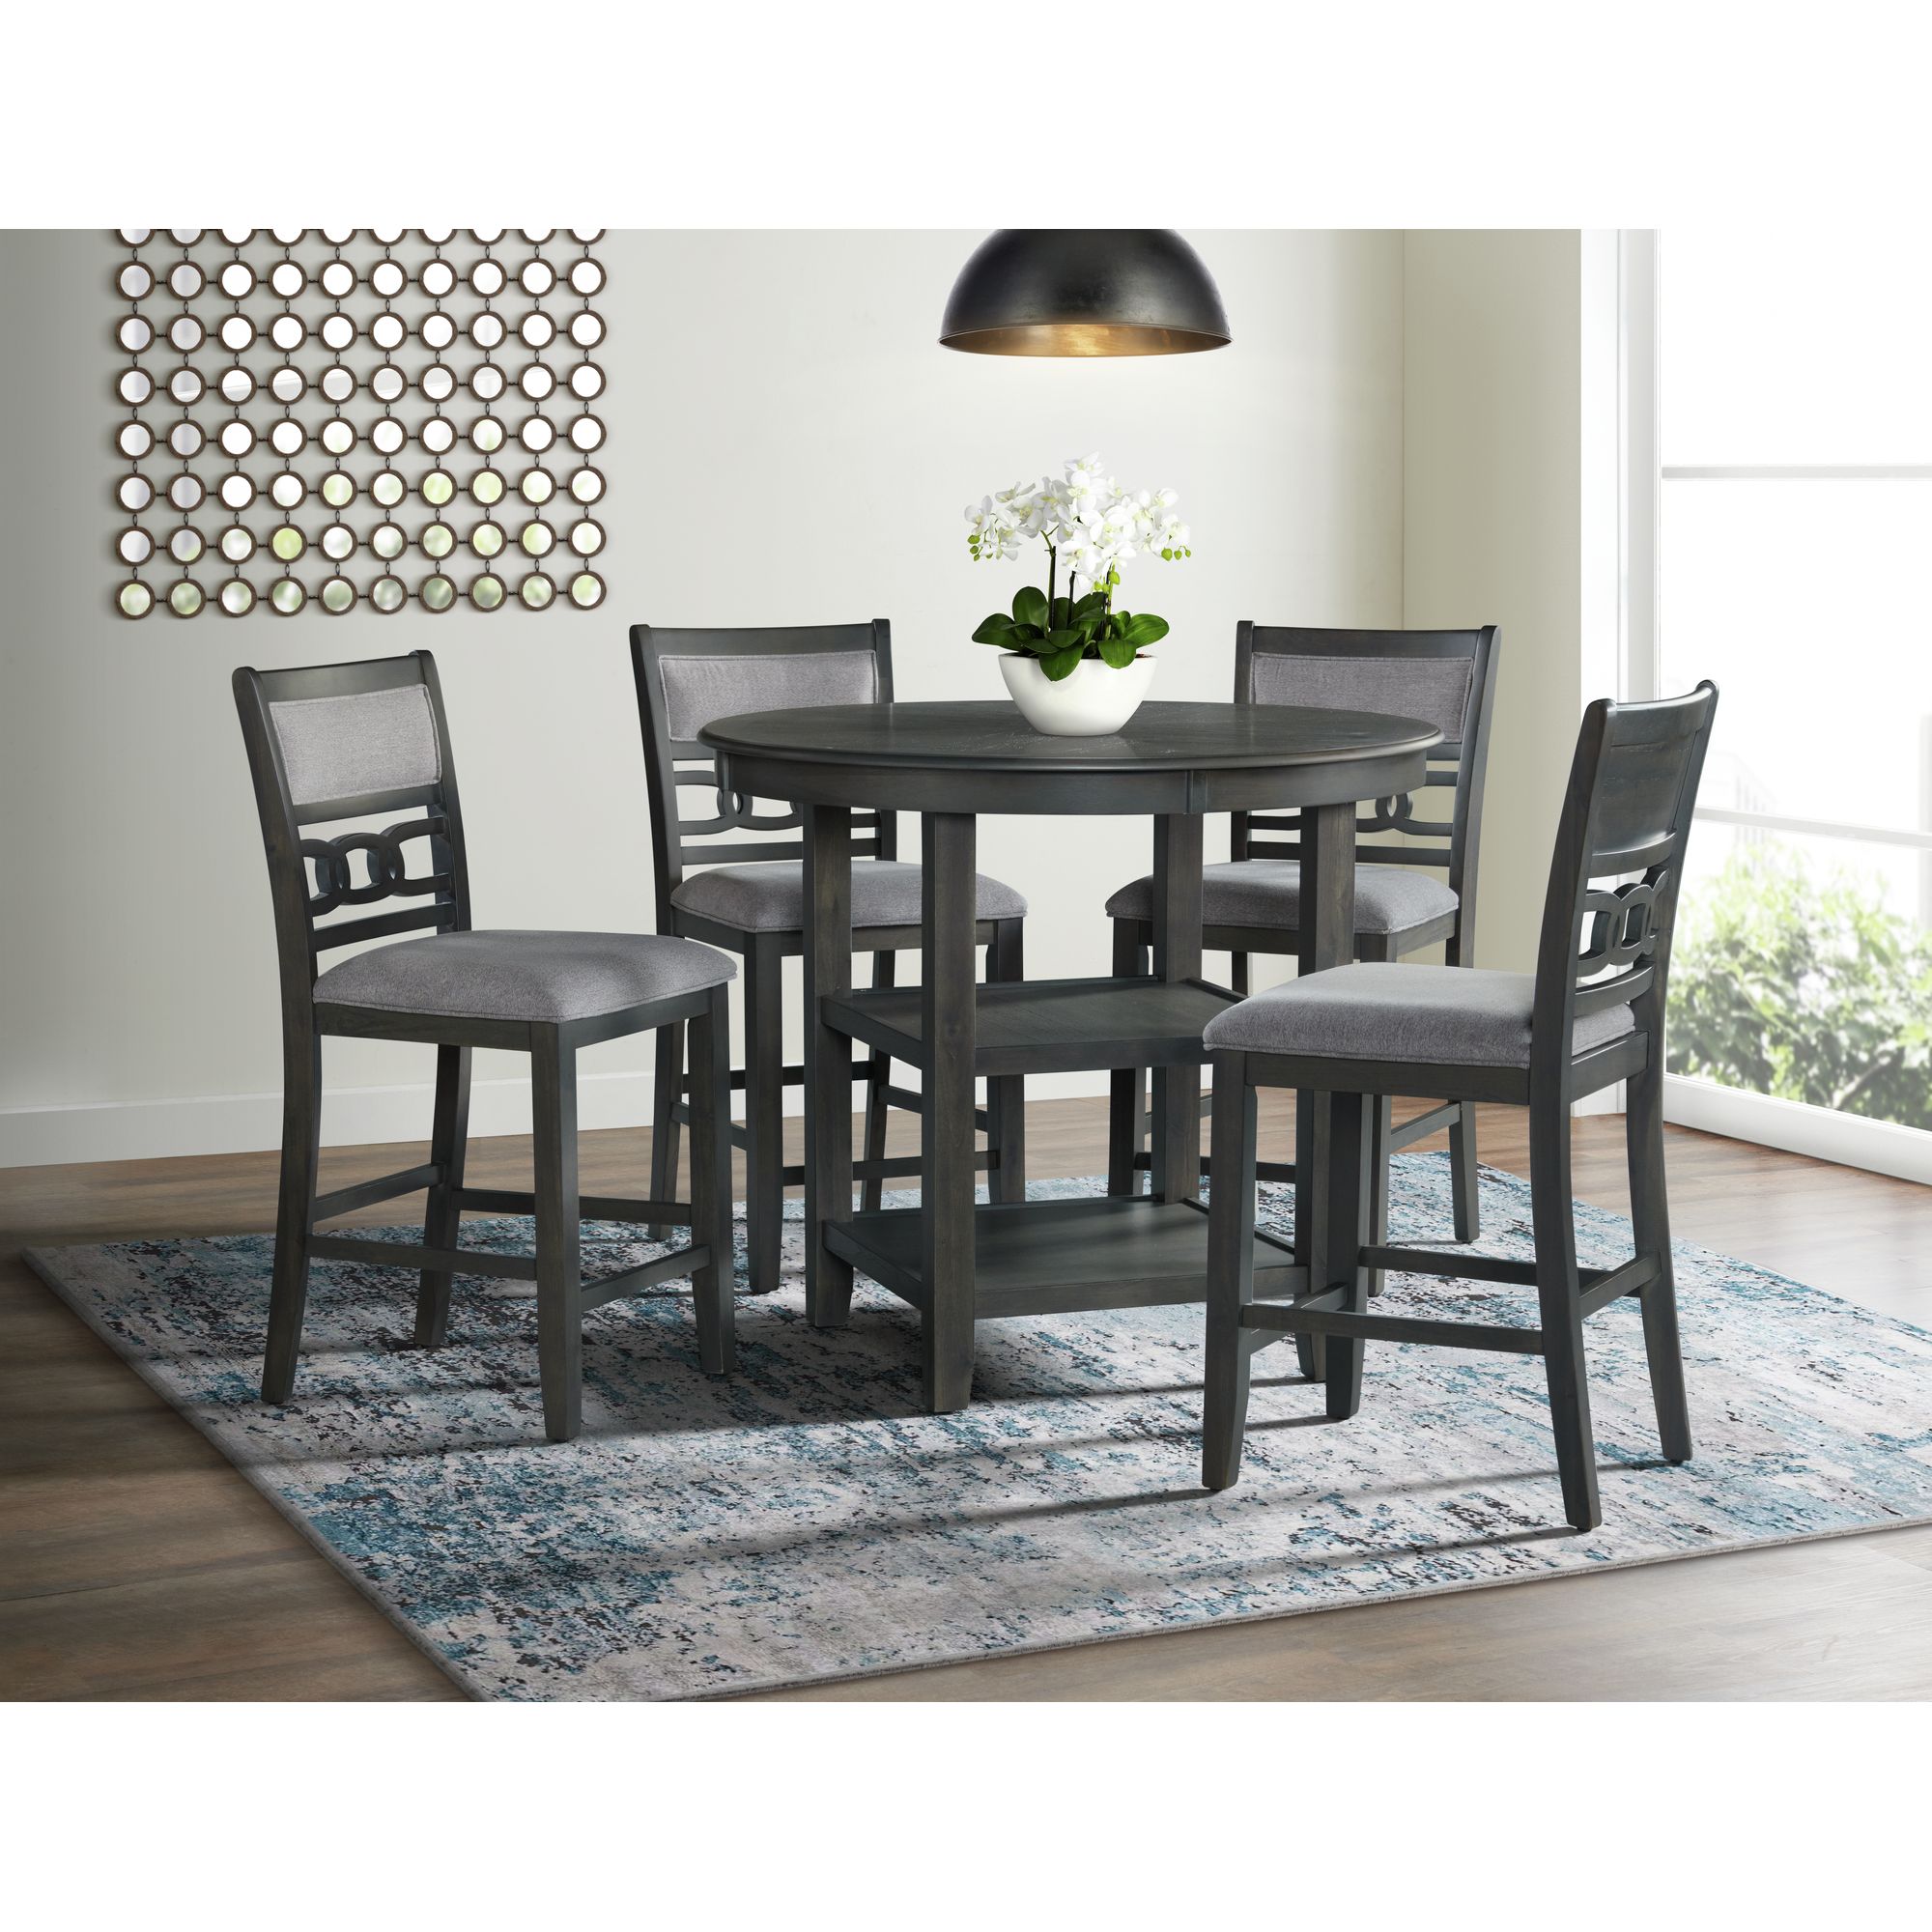 taylor counter height 5pc dining set-table and four side chairs in gray | - Picket House Furnishings DAH350C5PC